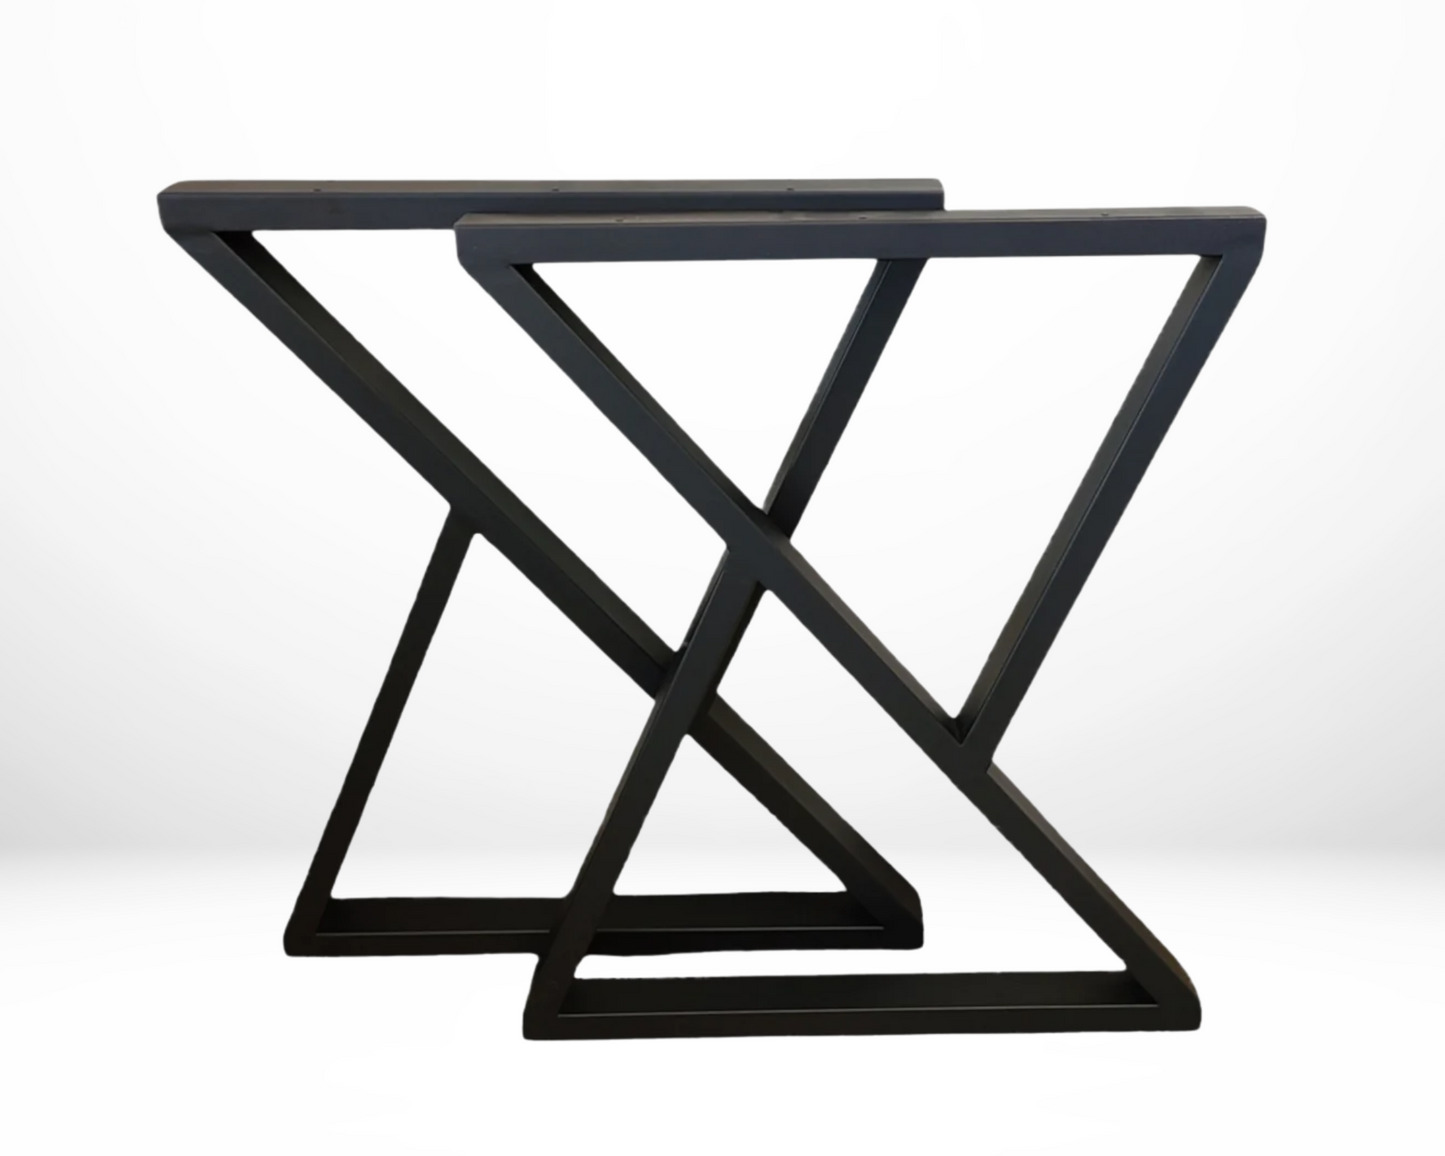 Inverted-Triangular-Shaped Table Legs <br> 28" Tall <br> TL1064A